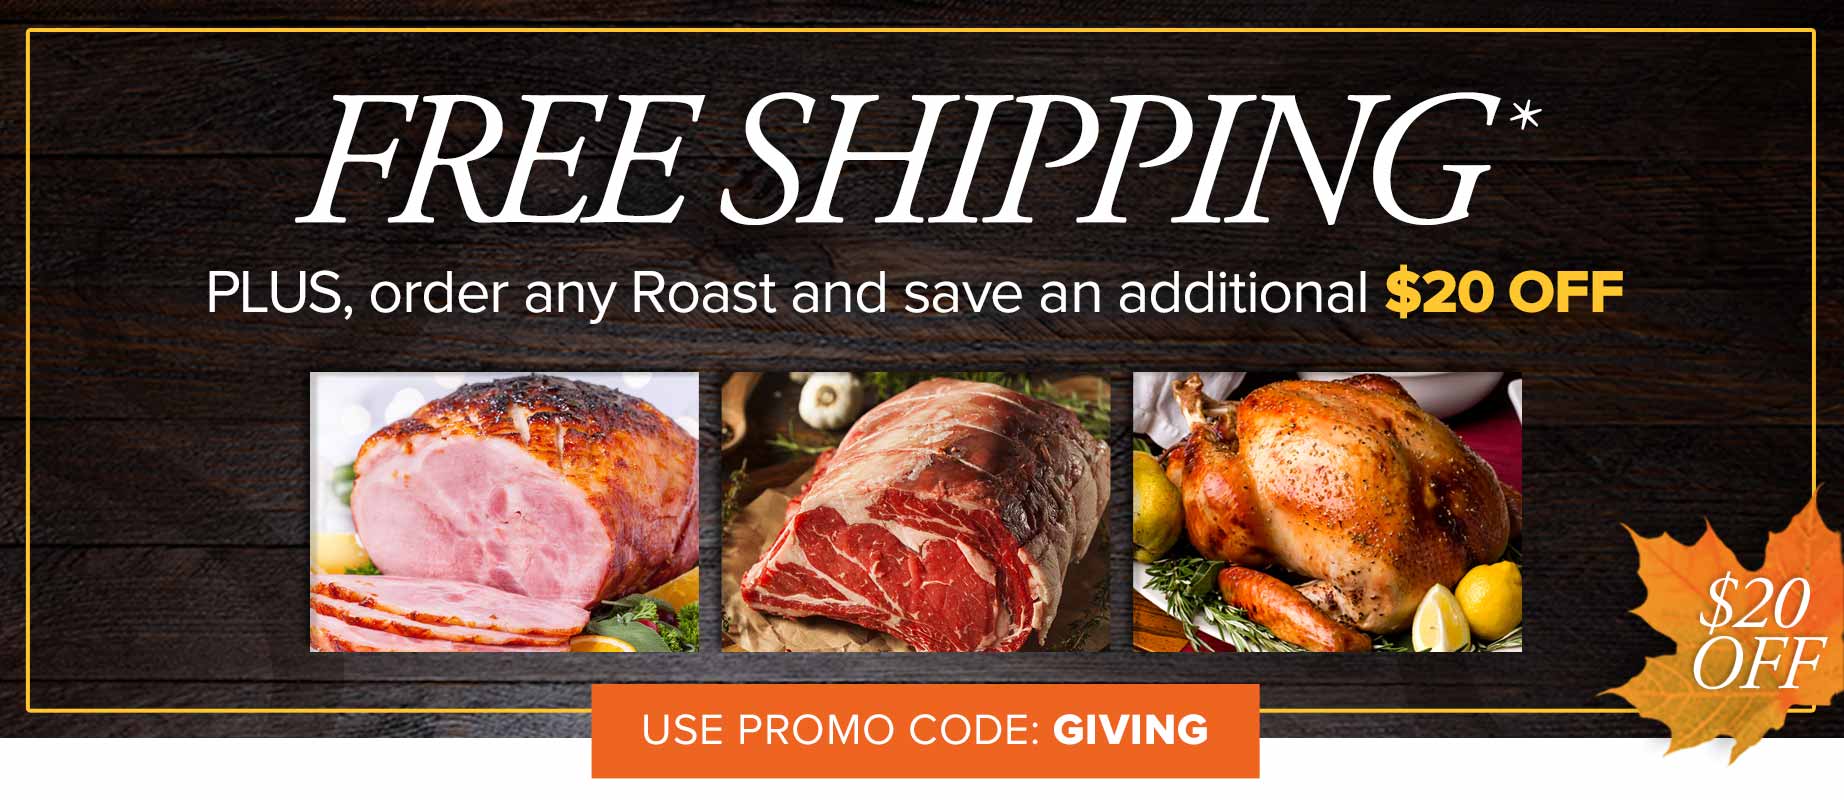 Exclusive Limited Time Offer - Free Shipping plus $20 off ALL Roast Orders $189+ Use Promo Code ROAST